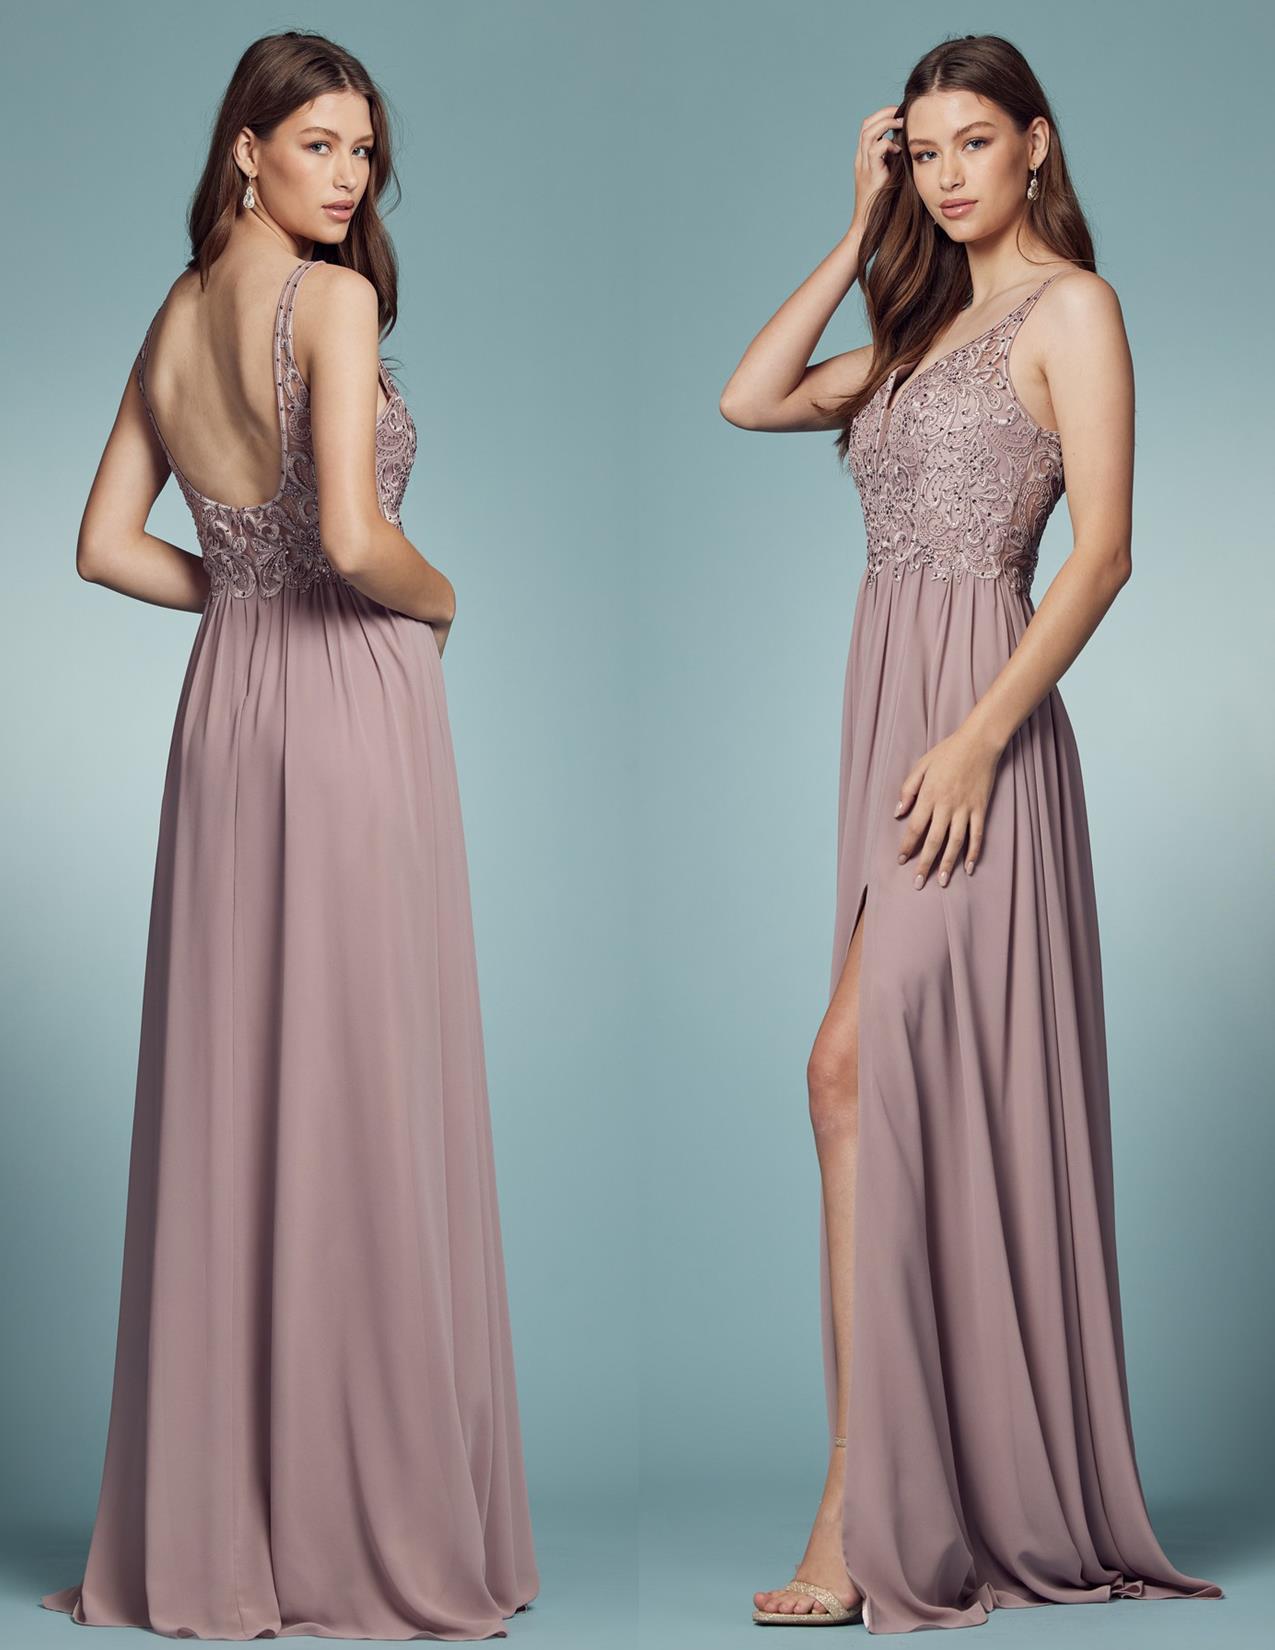 Lace Bodice Chiffon Gown in Mauve A992M - After Hours Boutique